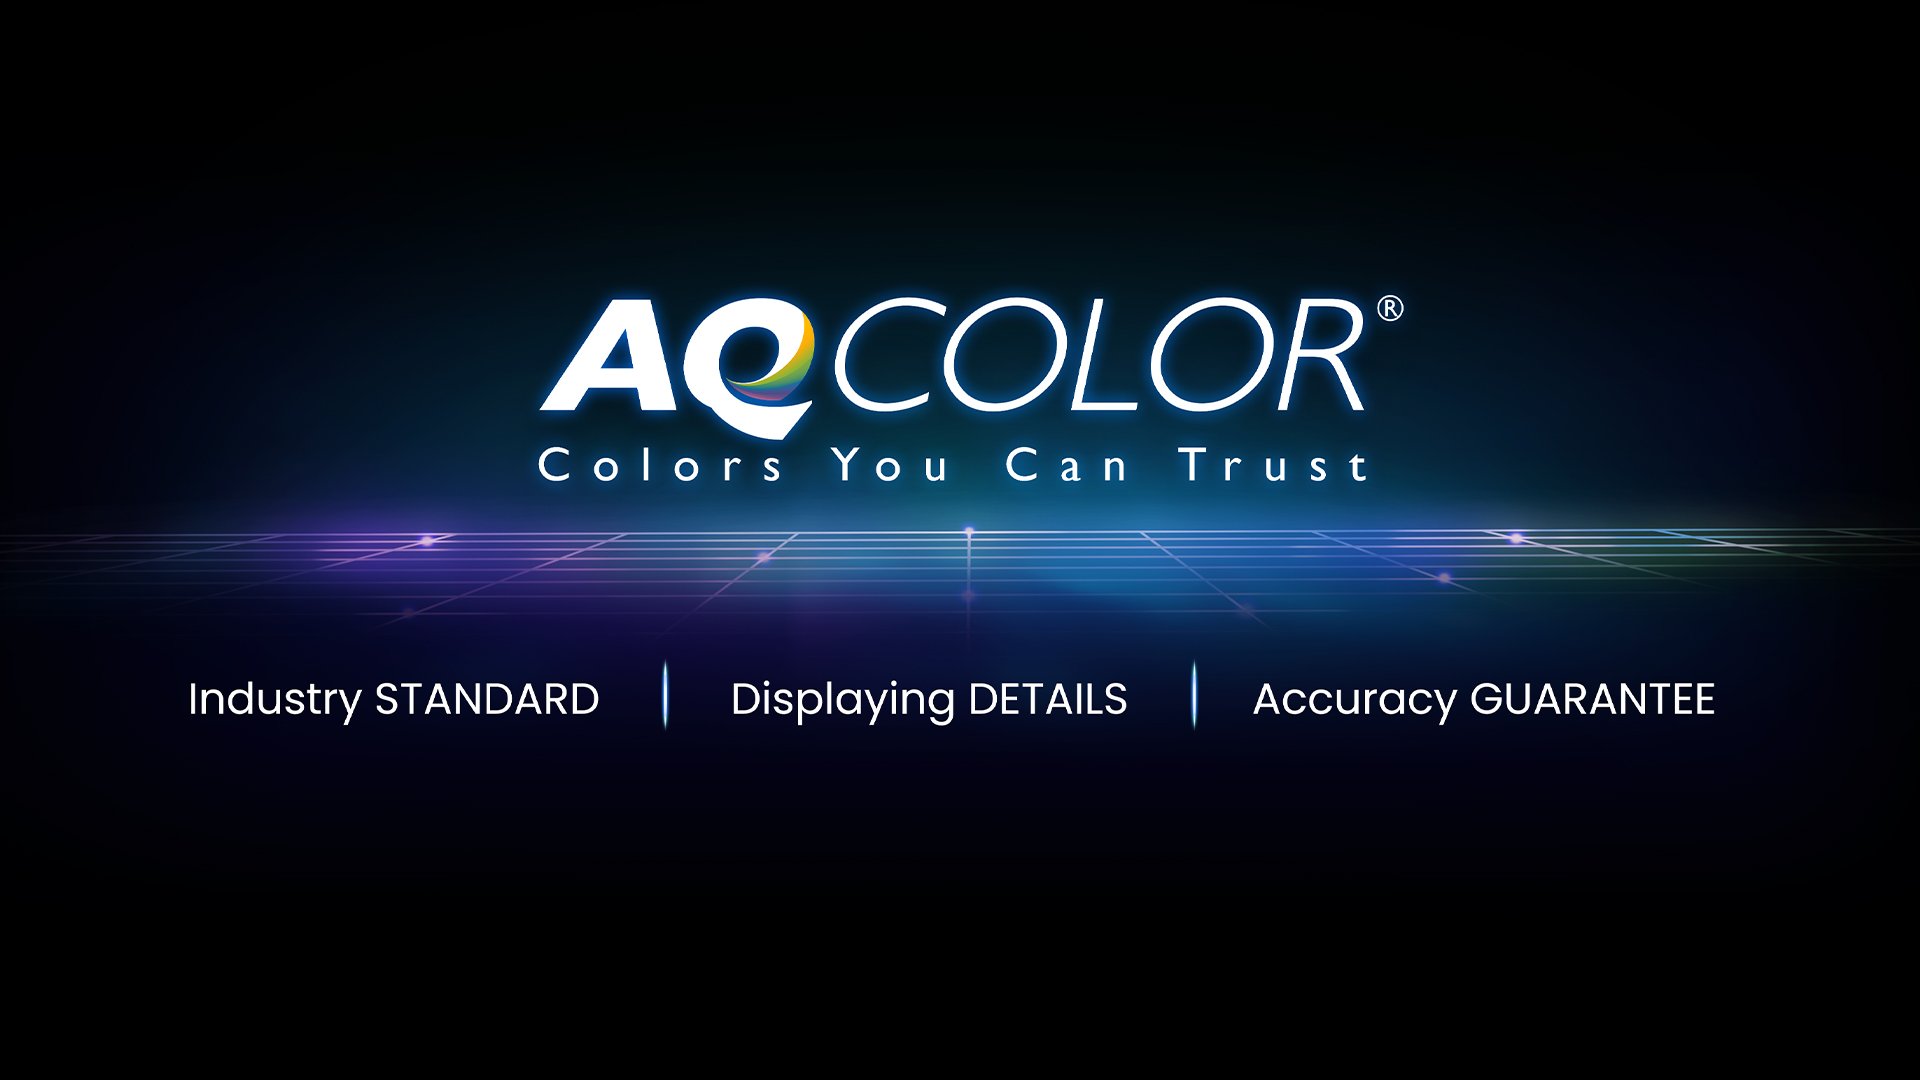 BenQ AQCOLOR technology delivers 'Accurate Reproduction.' This translates to the display of color precisely as it is intended to appear. With Delta E ≤ 2 and BenQ ICCsync, SW272U offers out-of-the-box and easy-to-reach color accuracy. The 16-bit 3D lookup table (LUT) improves color blending for precise reproduction. 